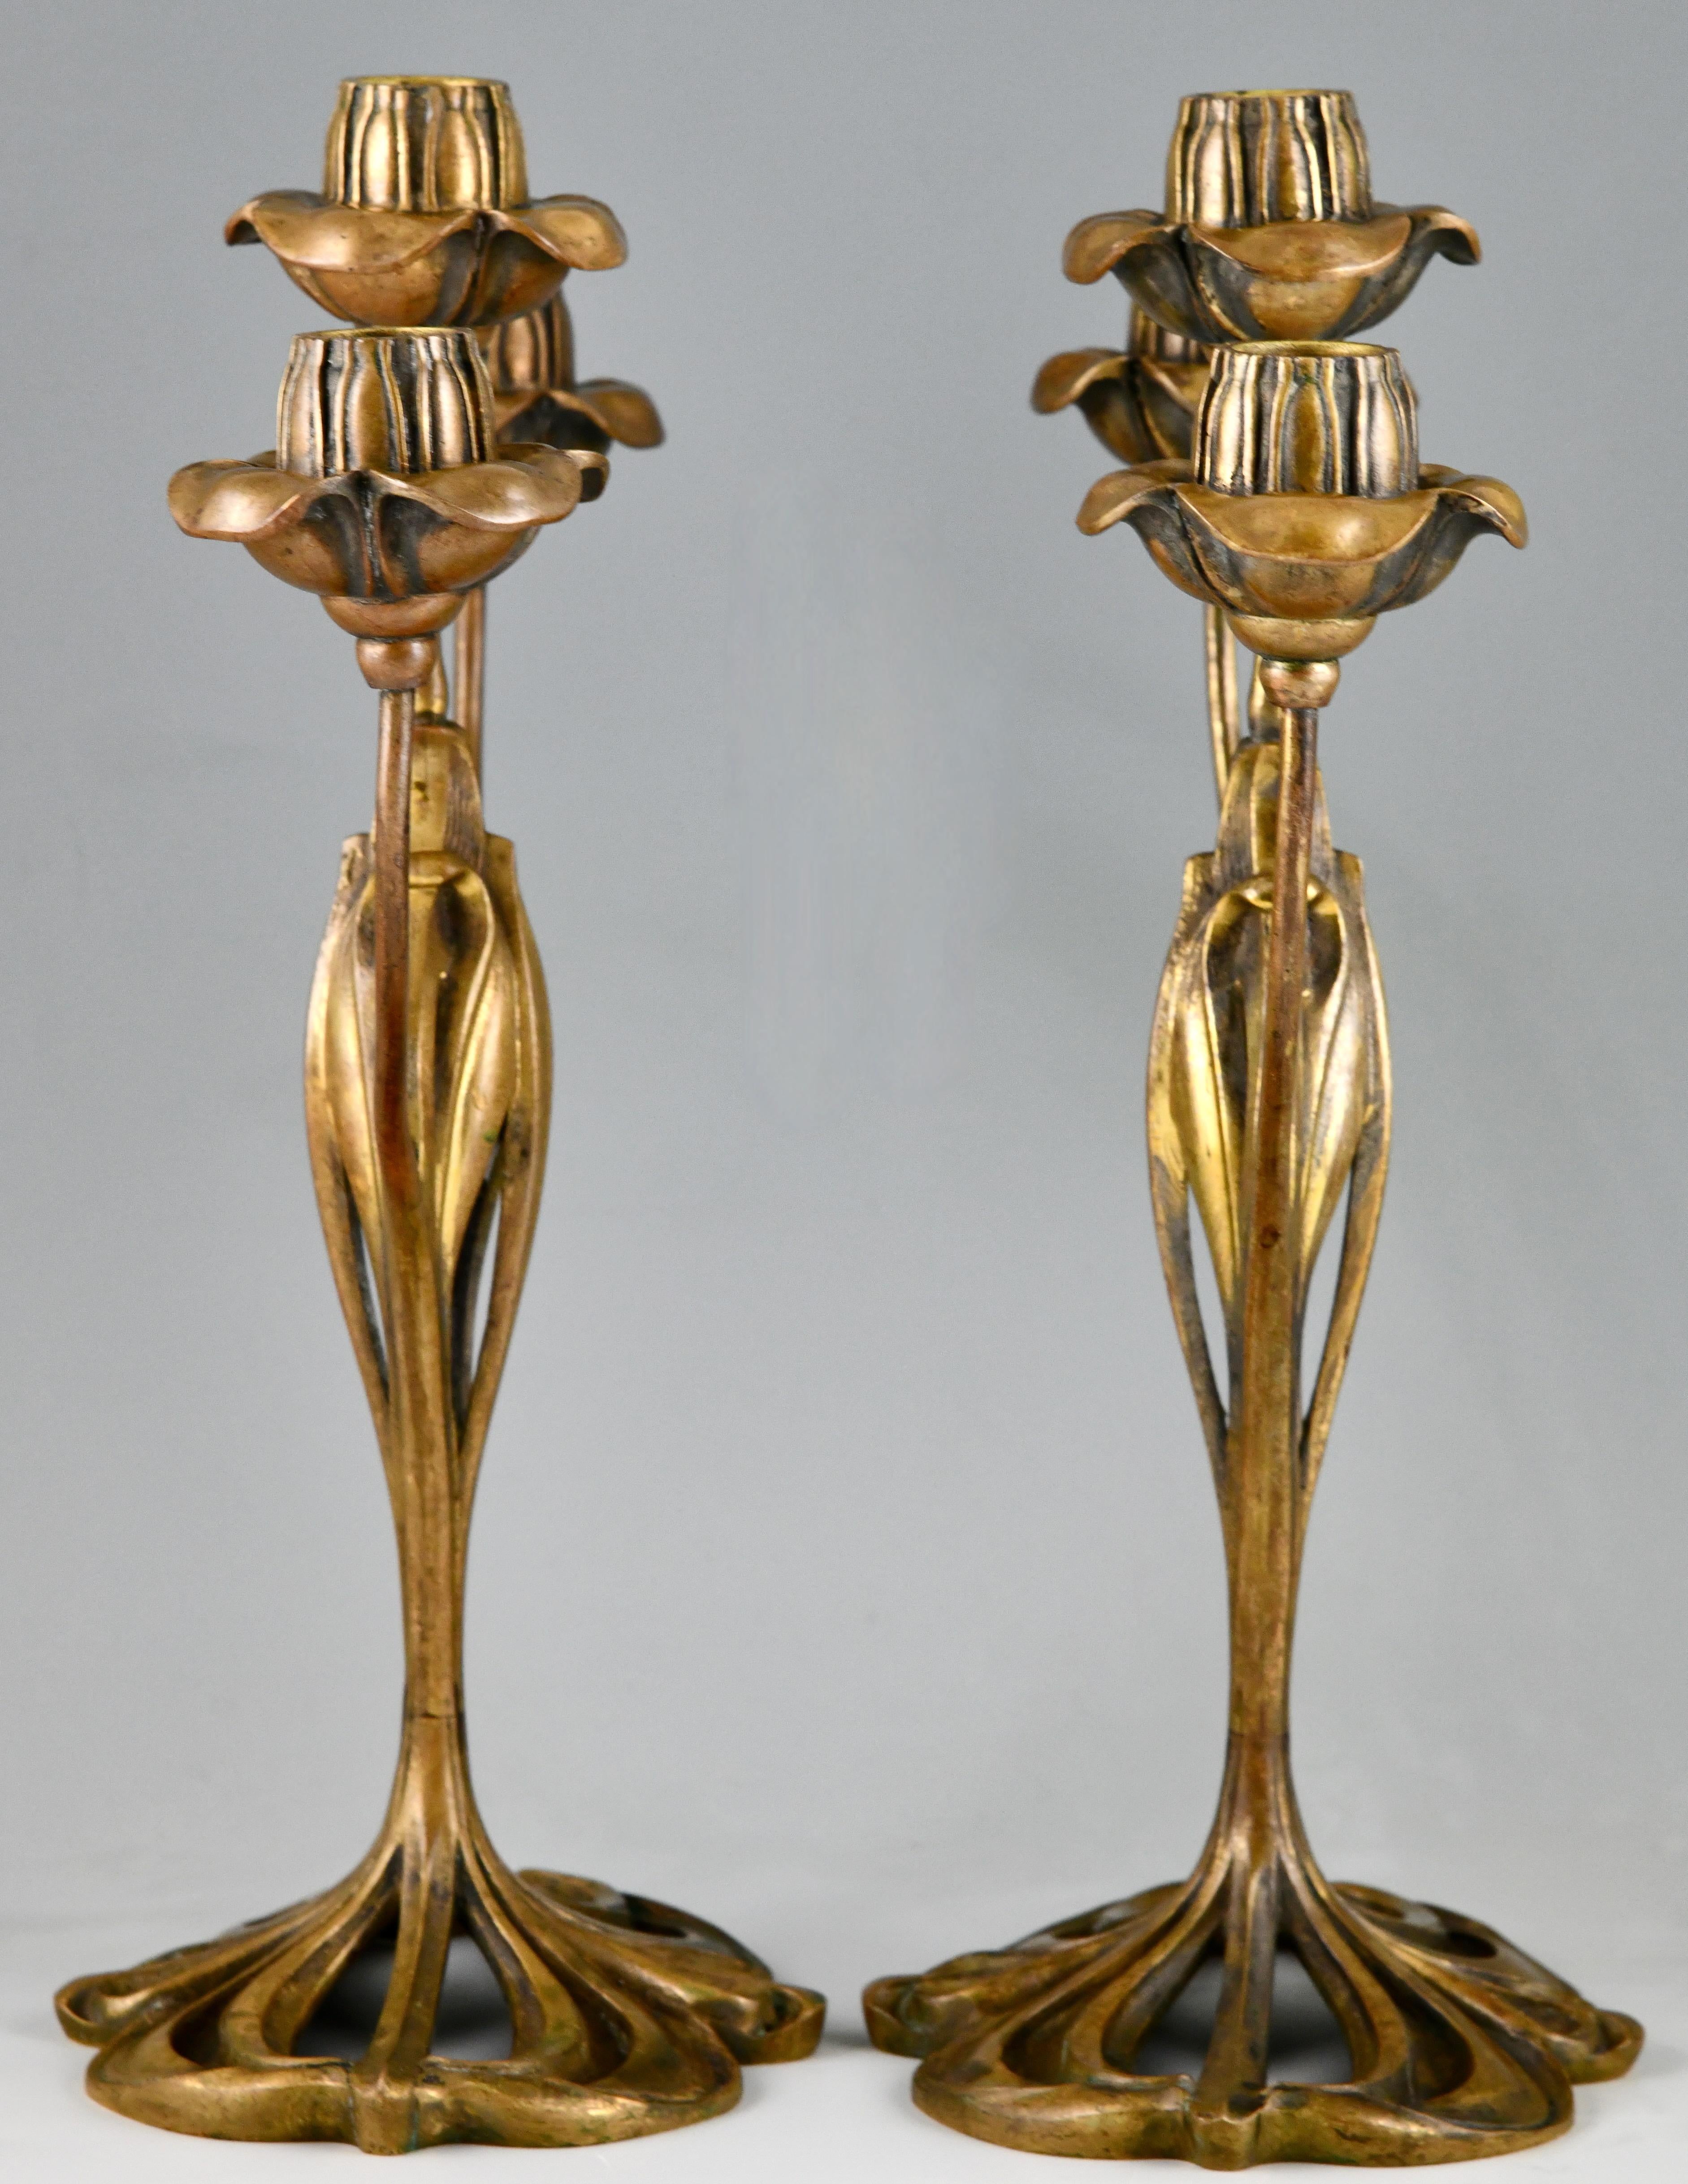 French Pair of bronze Art Nouveau candelabra with floral design by Georges de Feure